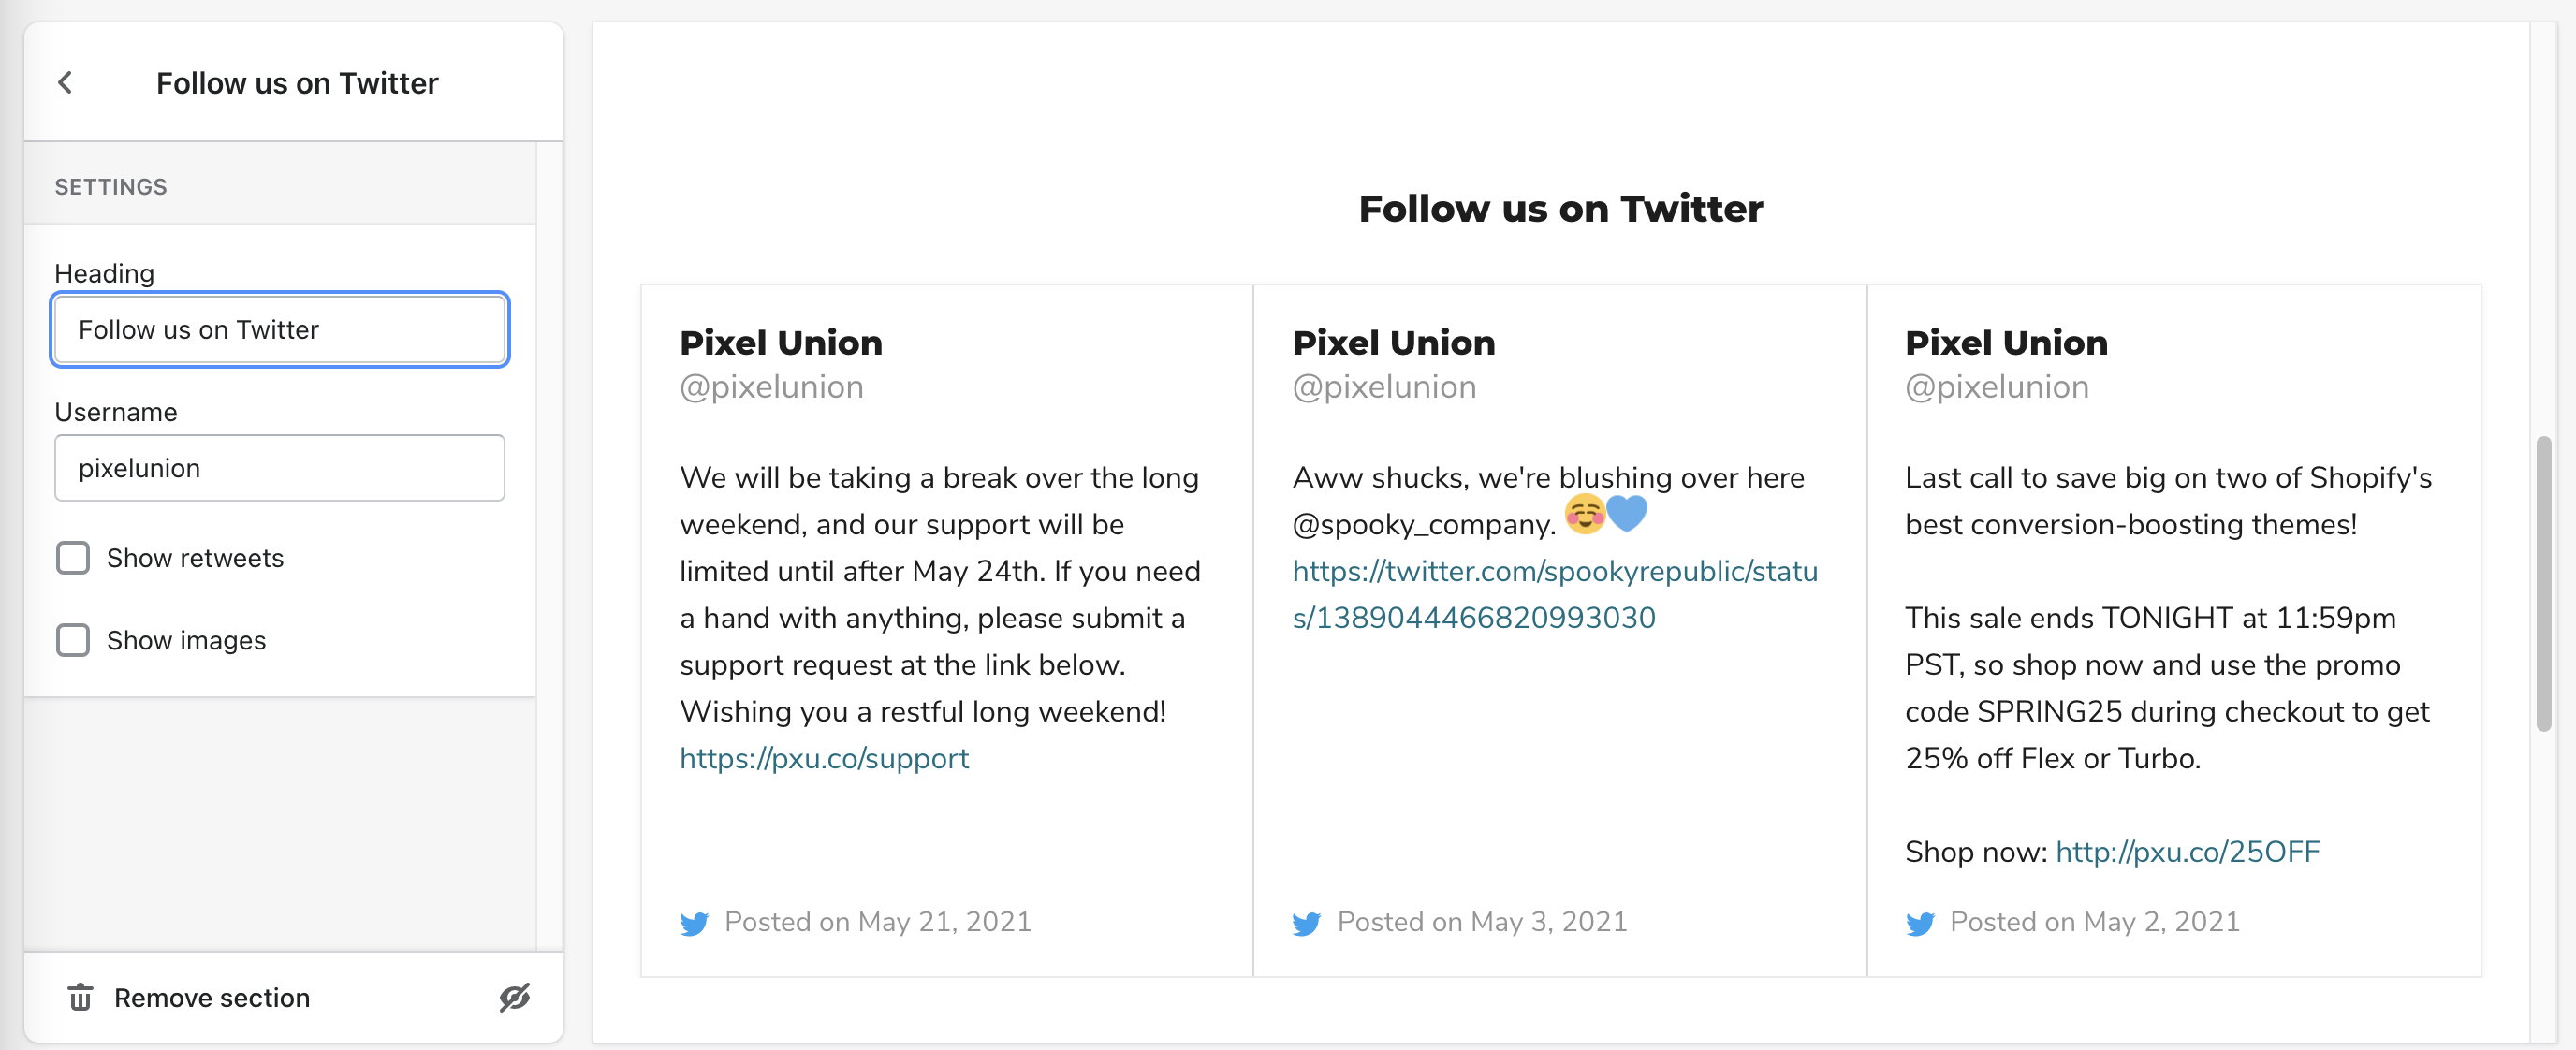 twitter_feed_being_set_up_for_pixel_union_account.png